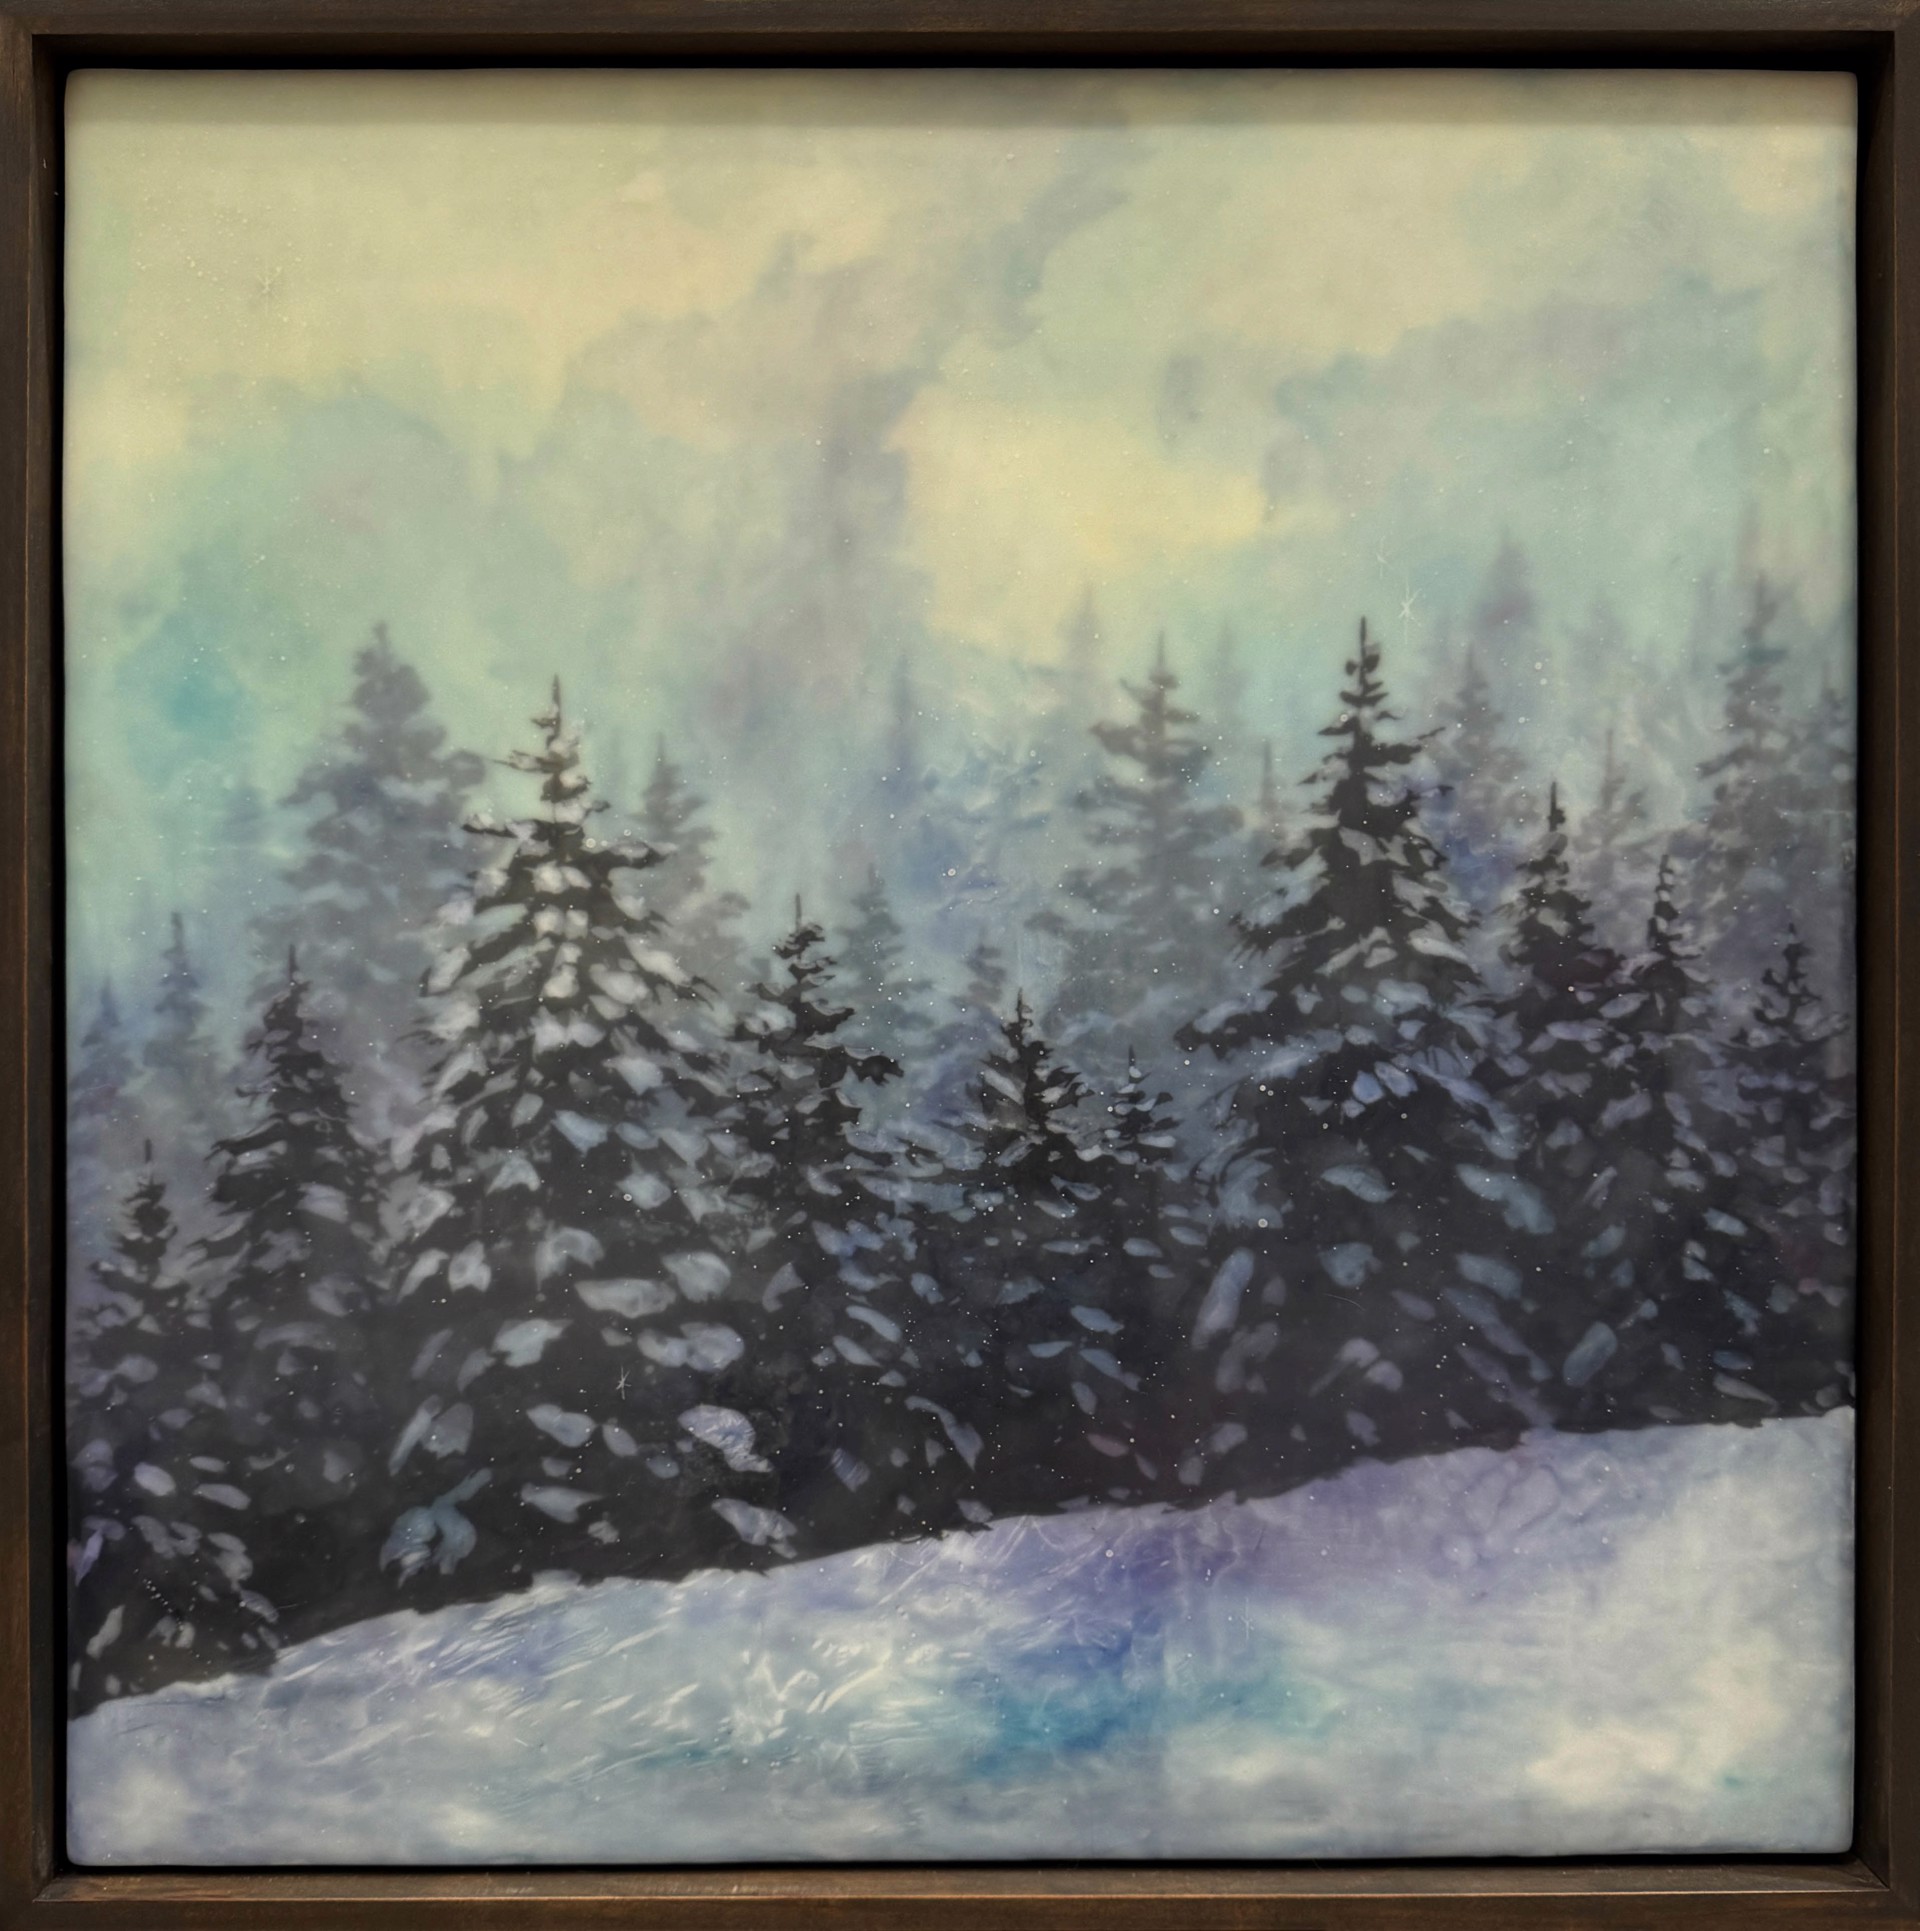 Original Encaustic Painting By Bridgette Meinhold Featuring A Pine Covered Mountain Slope